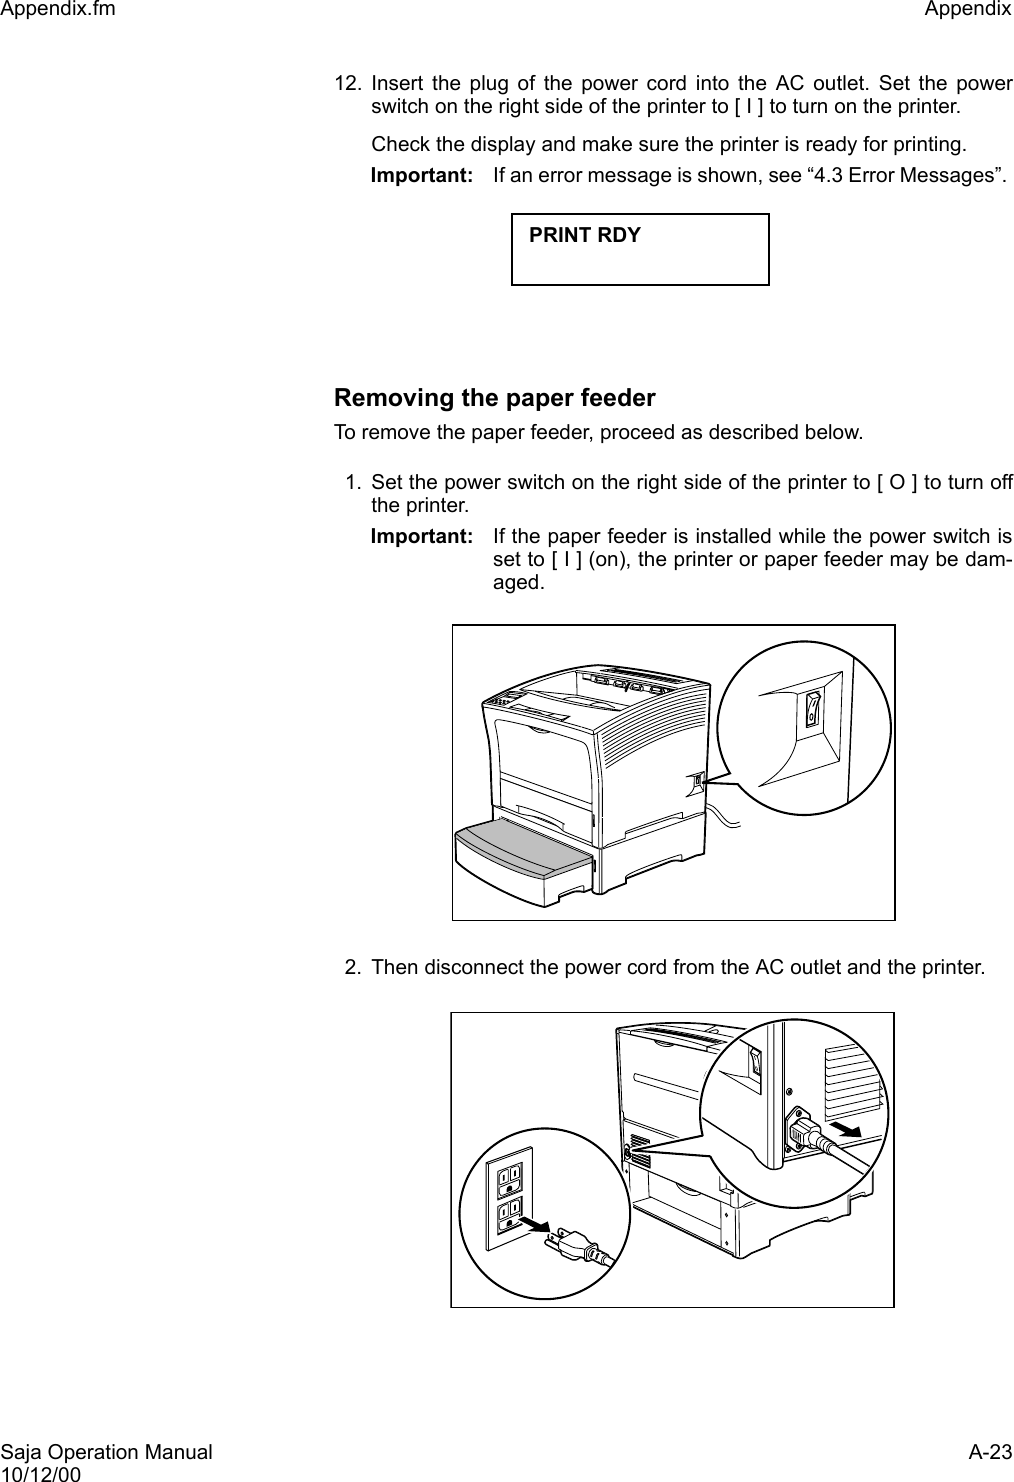 Saja Operation Manual A-2310/12/00Appendix.fm Appendix 12. Insert the plug of the power cord into the AC outlet. Set the powerswitch on the right side of the printer to [ I ] to turn on the printer.Check the display and make sure the printer is ready for printing. Important: If an error message is shown, see “4.3 Error Messages”. Removing the paper feederTo remove the paper feeder, proceed as described below. 1. Set the power switch on the right side of the printer to [ O ] to turn offthe printer.Important: If the paper feeder is installed while the power switch isset to [ I ] (on), the printer or paper feeder may be dam-aged. 2. Then disconnect the power cord from the AC outlet and the printer. PRINT RDY